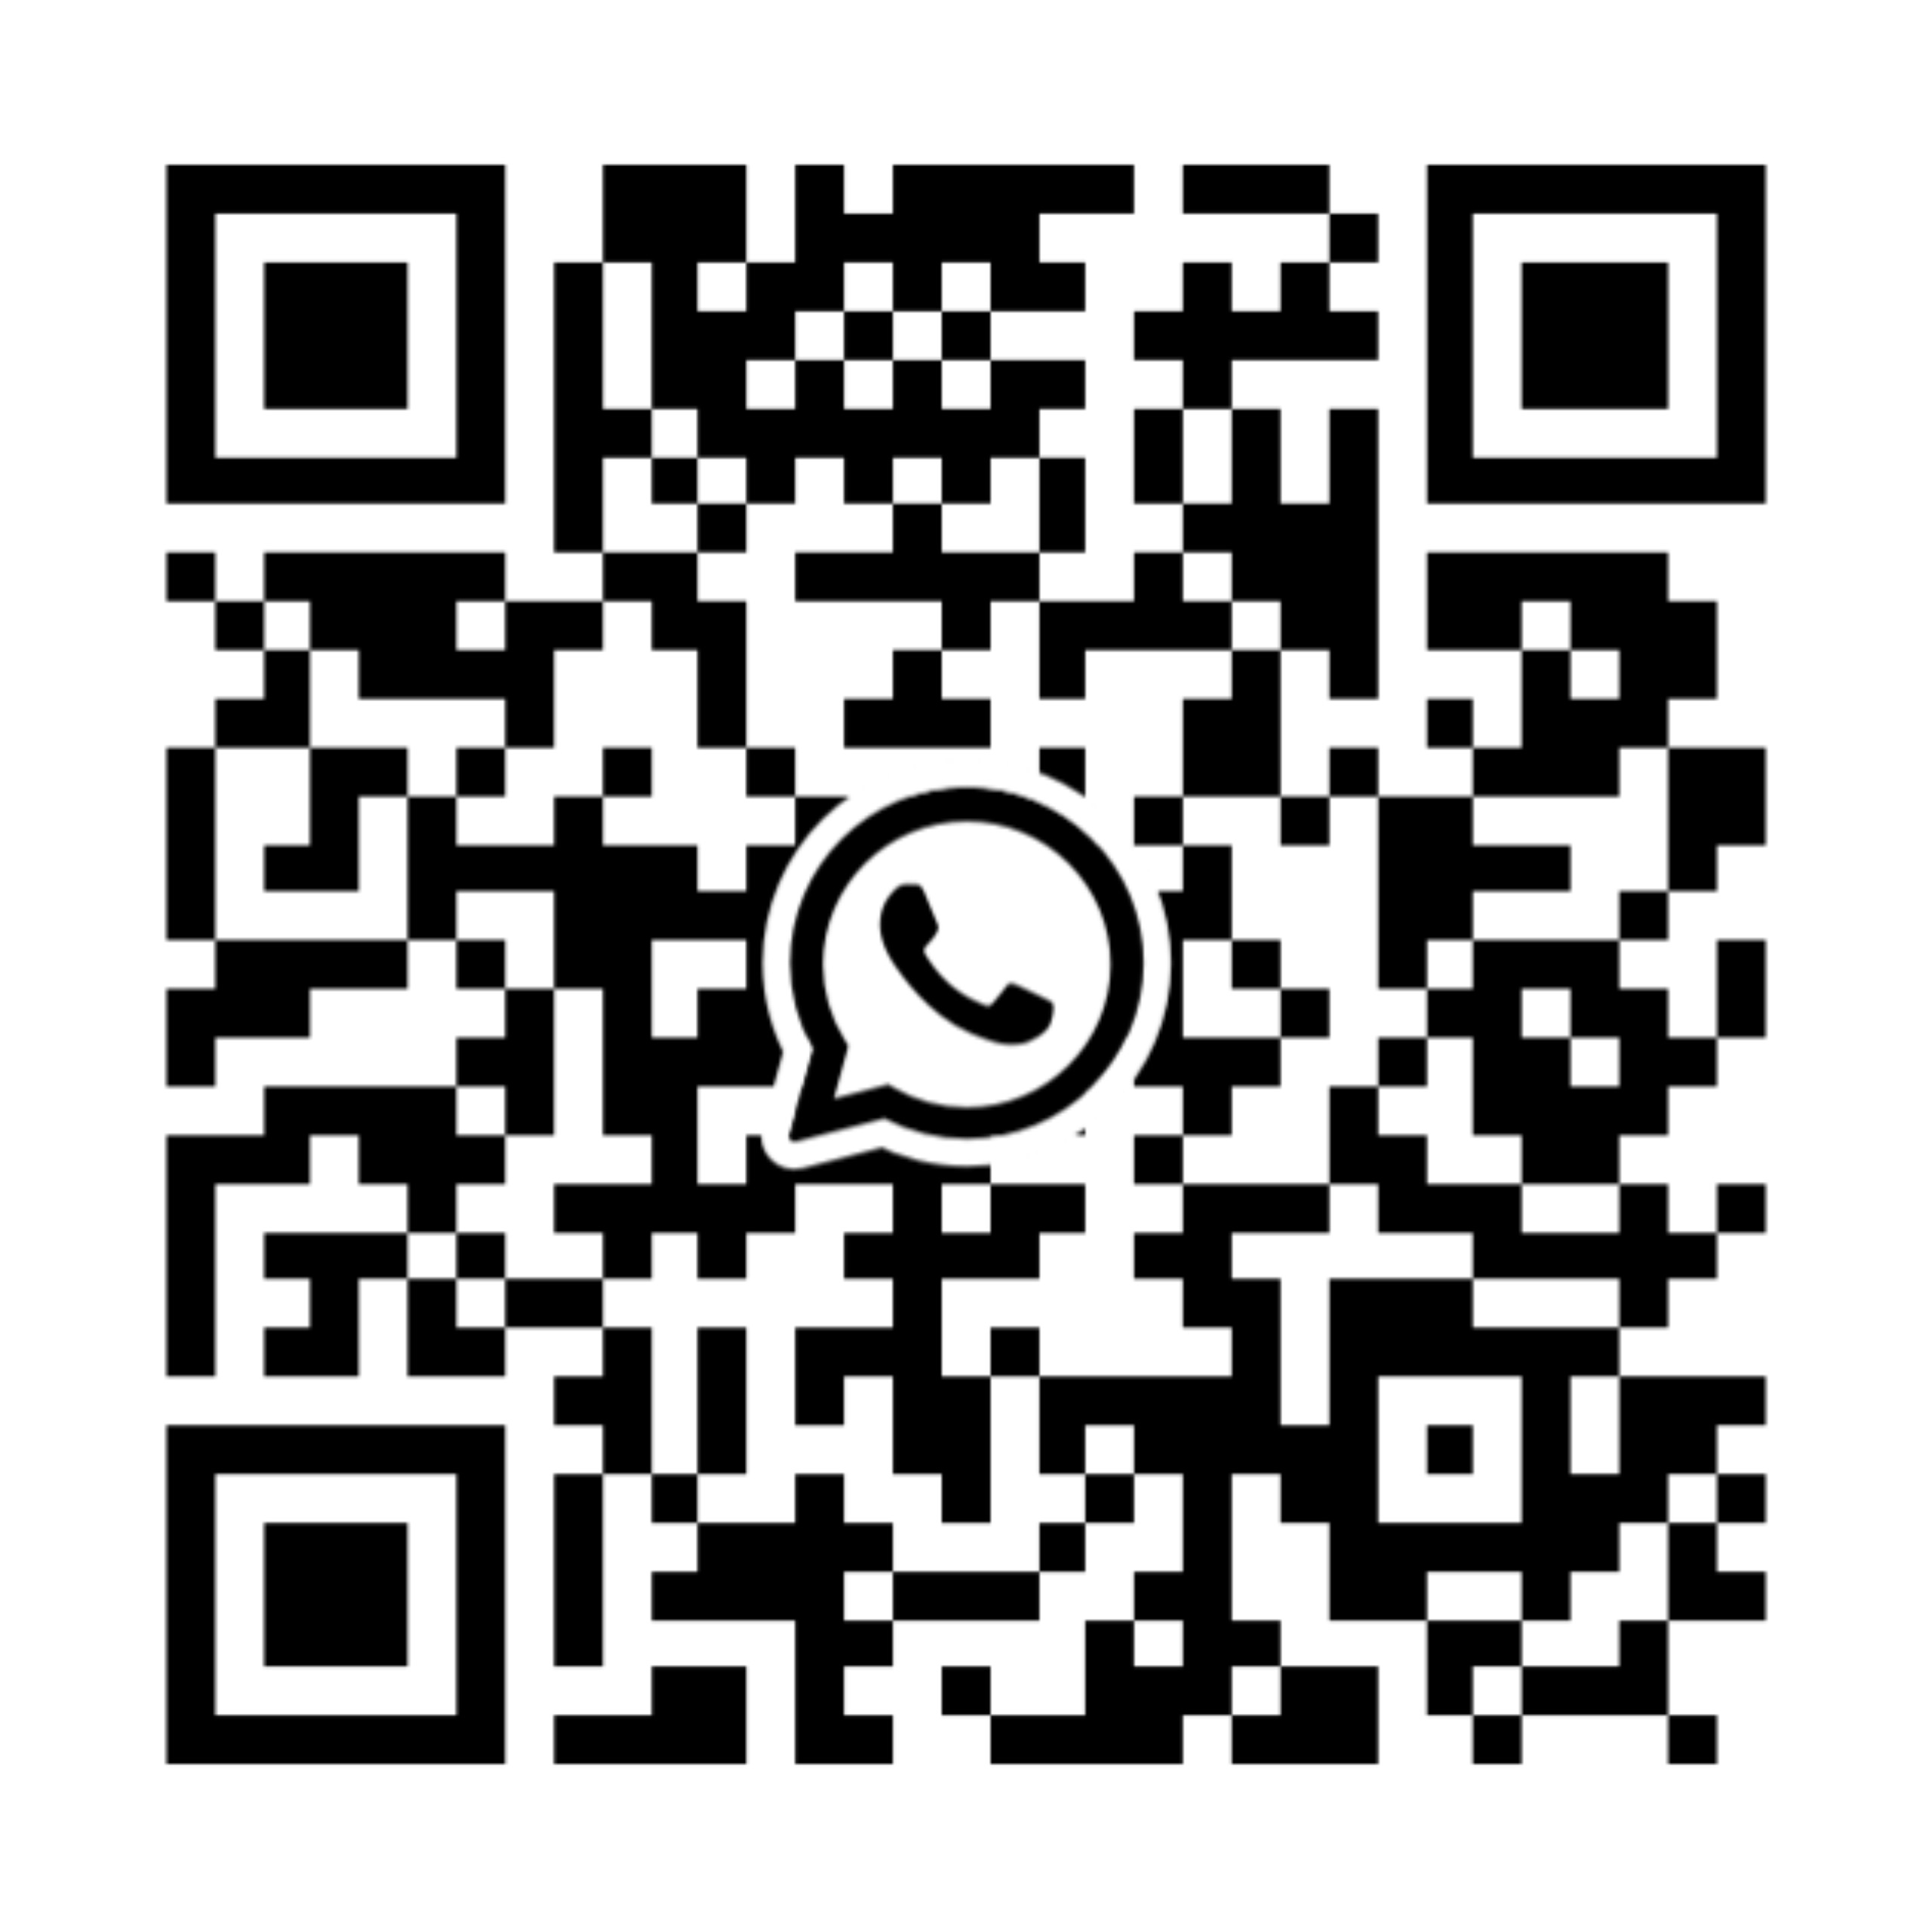 QR code to join our whatsapp group for vapeoutlet.co.za